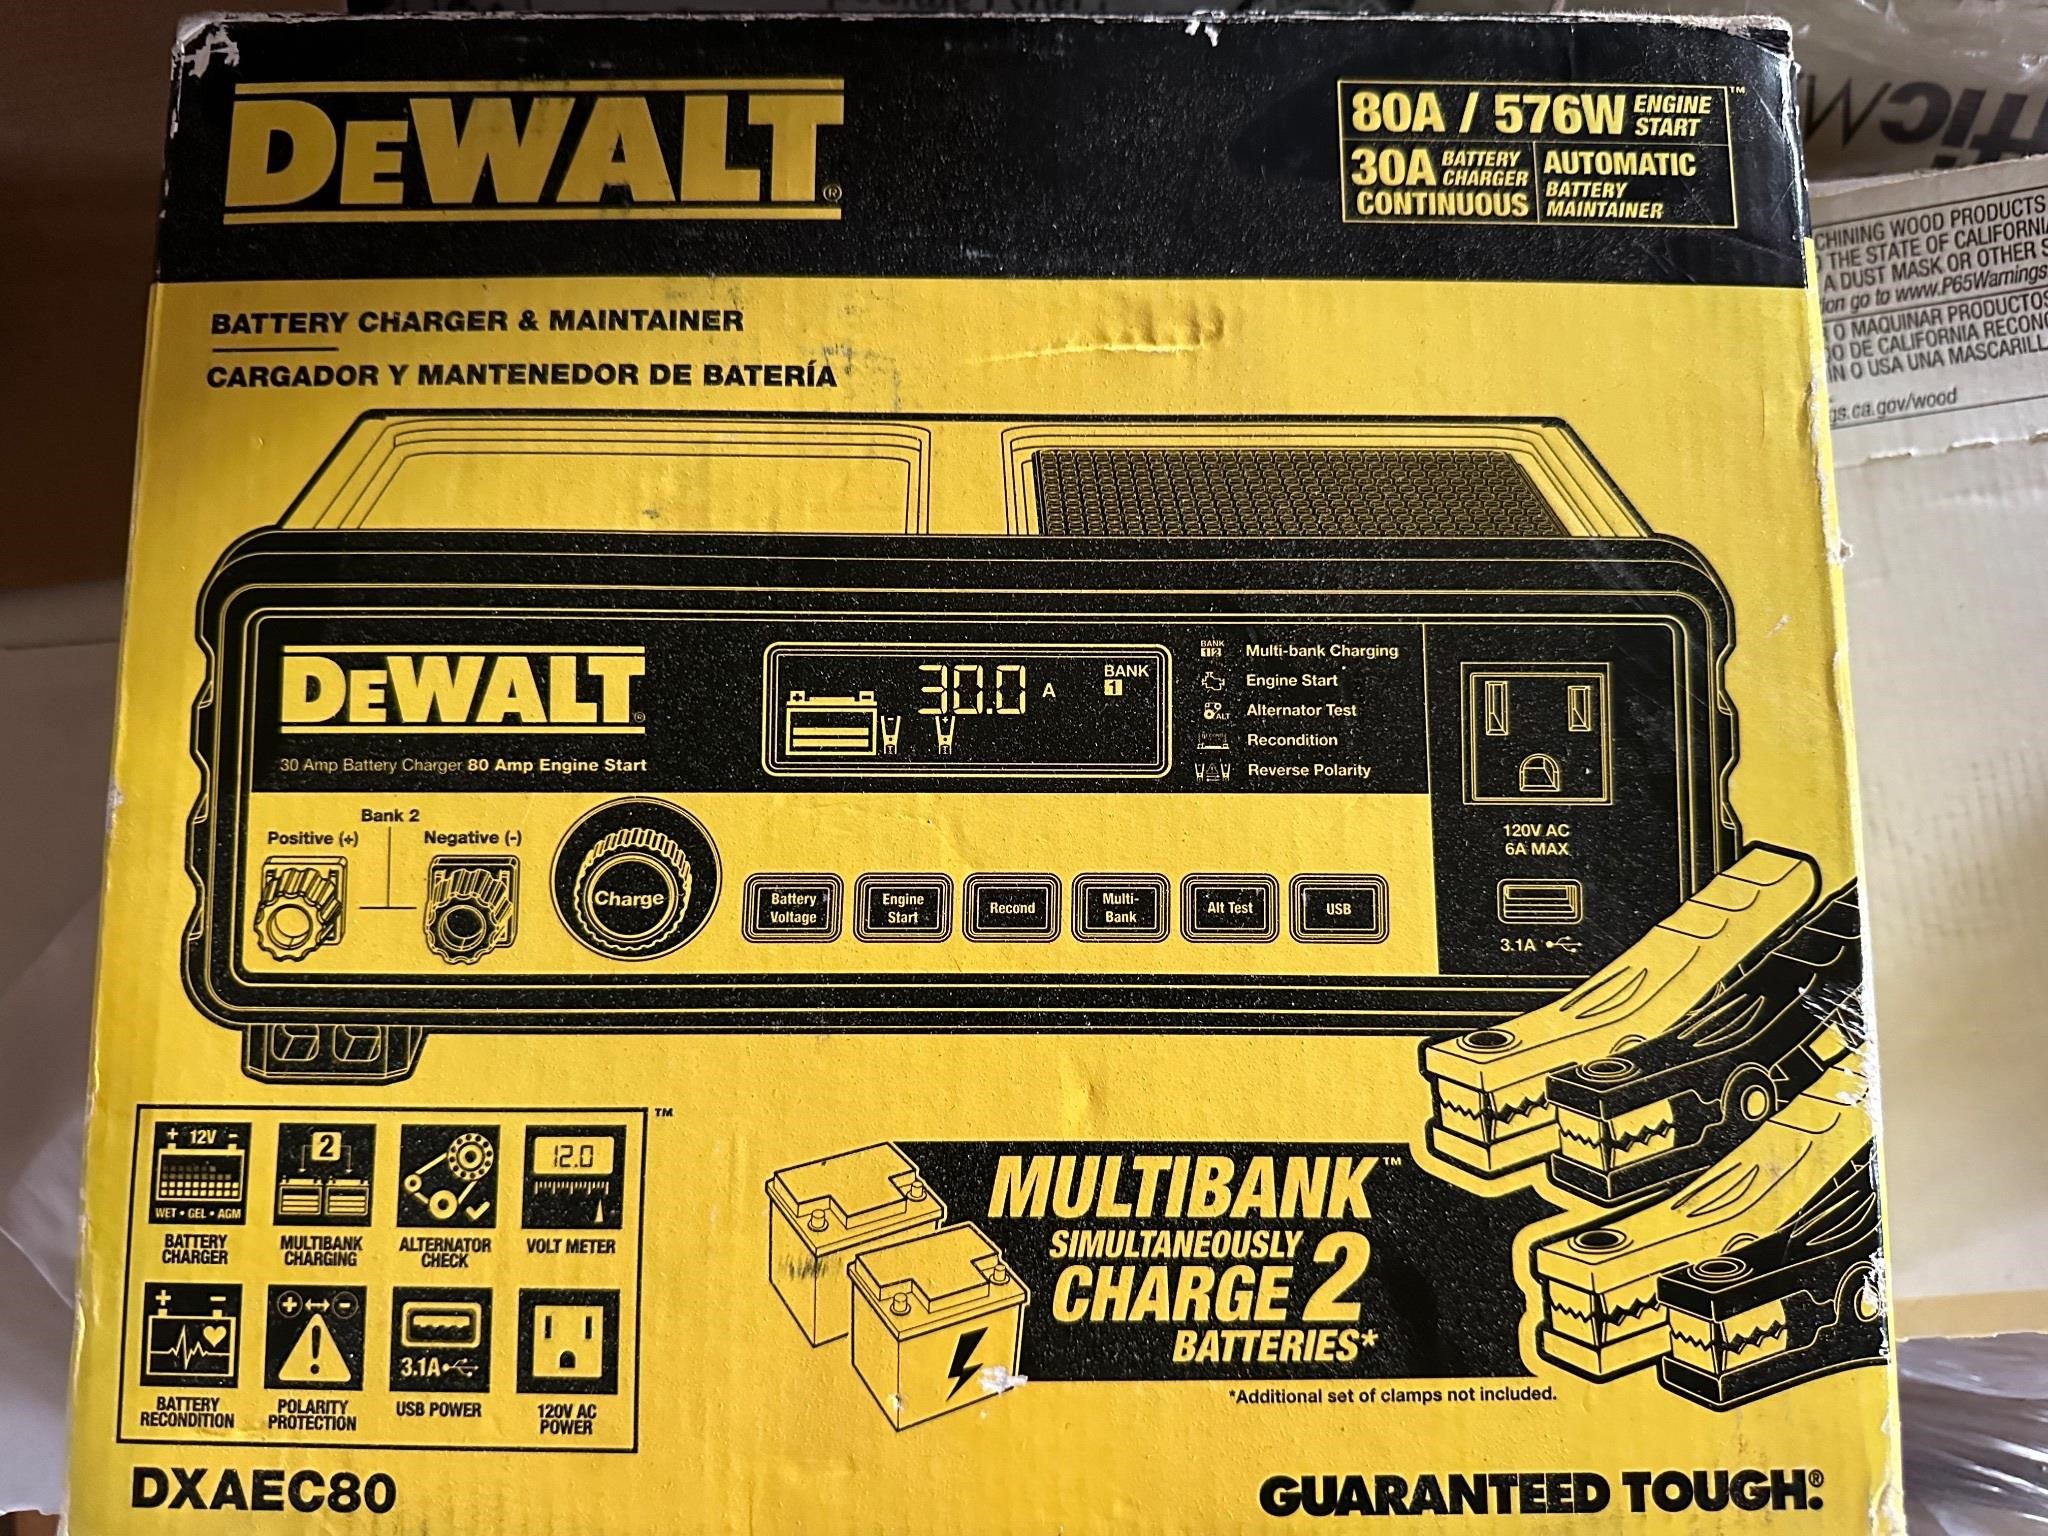 Dewalt battery charger & maintainer